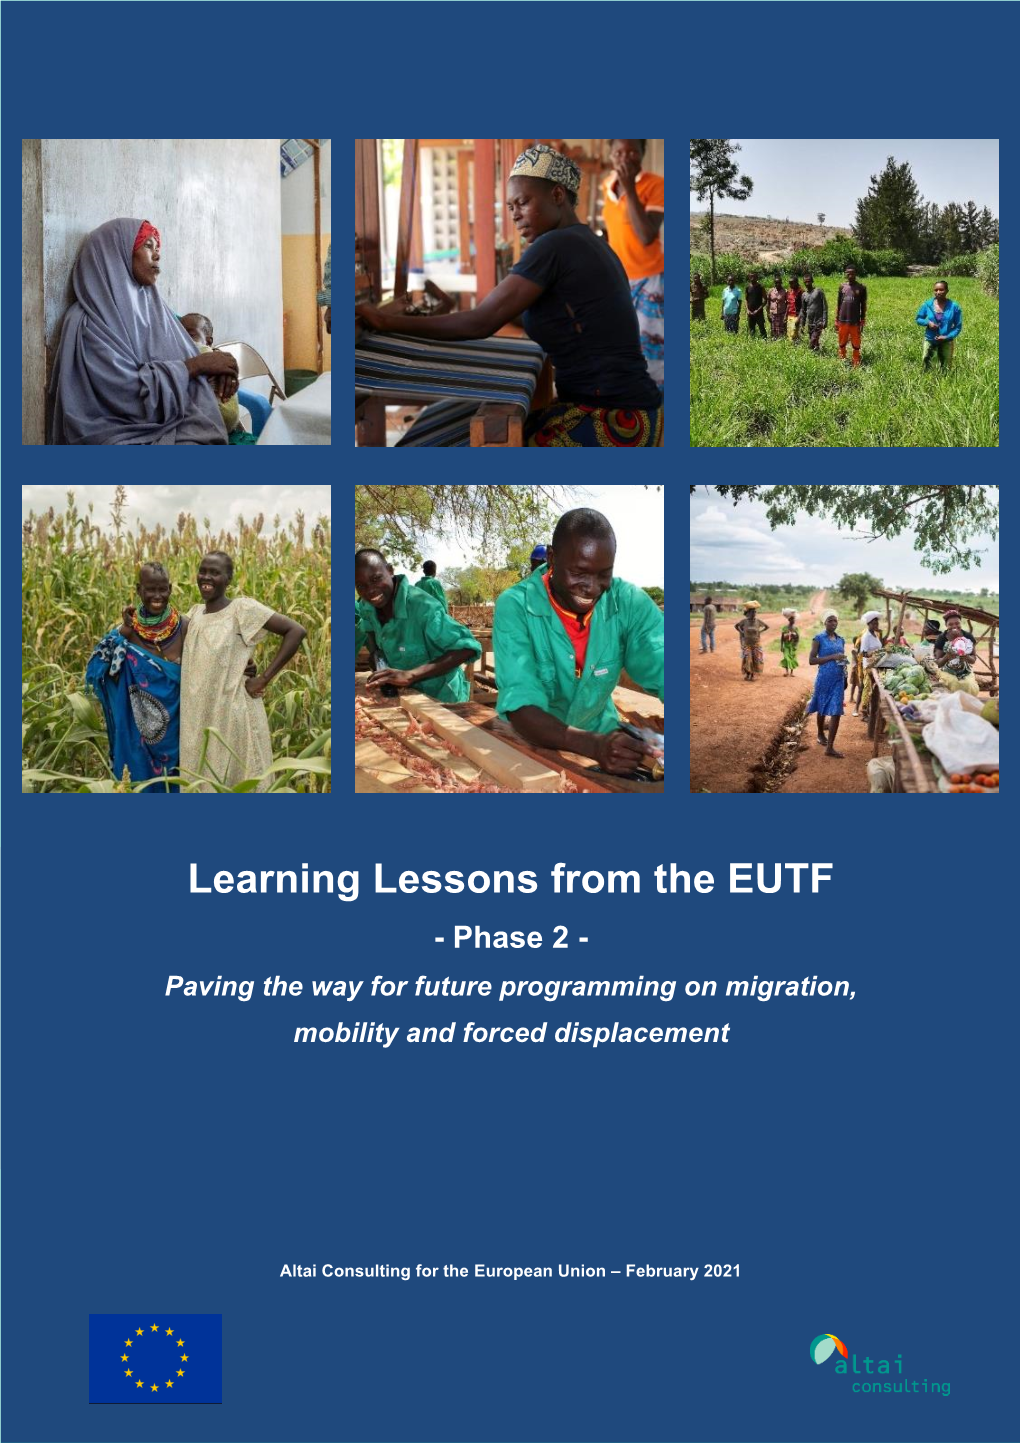 Learning Lessons from the EUTF - Phase 2 - Paving the Way for Future Programming on Migration, Mobility and Forced Displacement